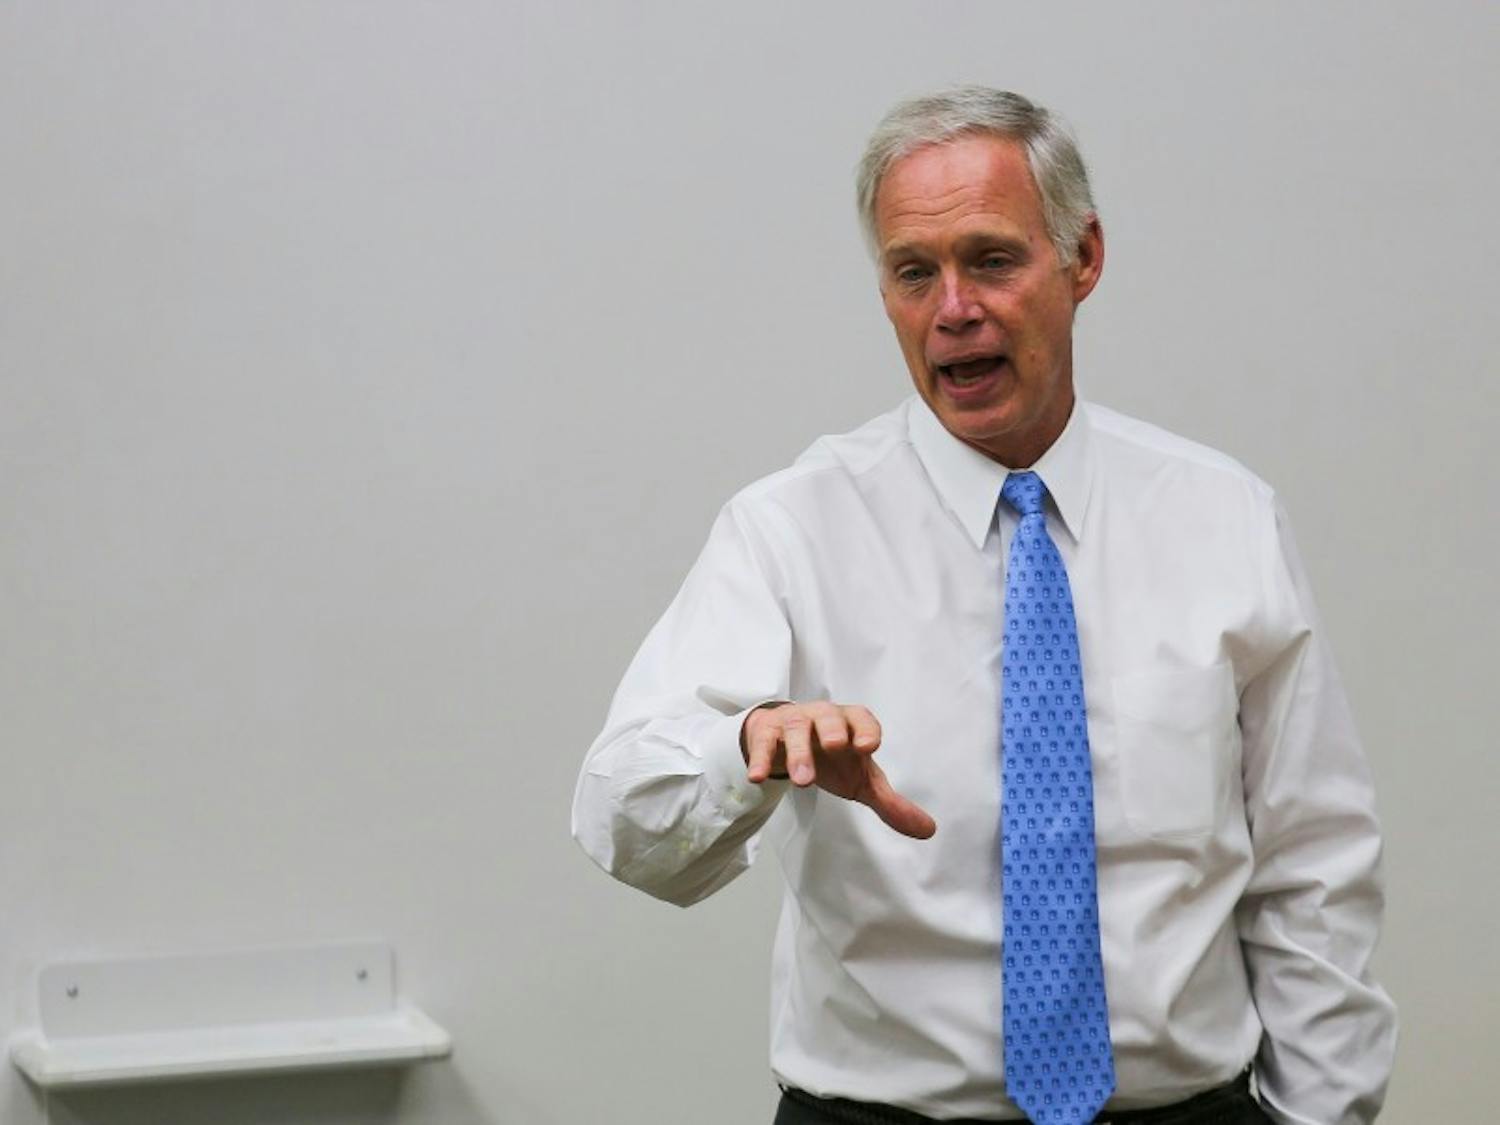 U.S. Sen. Ron Johnson, R-Wis., is the subject of an ethics complaint alleging a $10 million payment he received in 2010 violated campaign finance law.